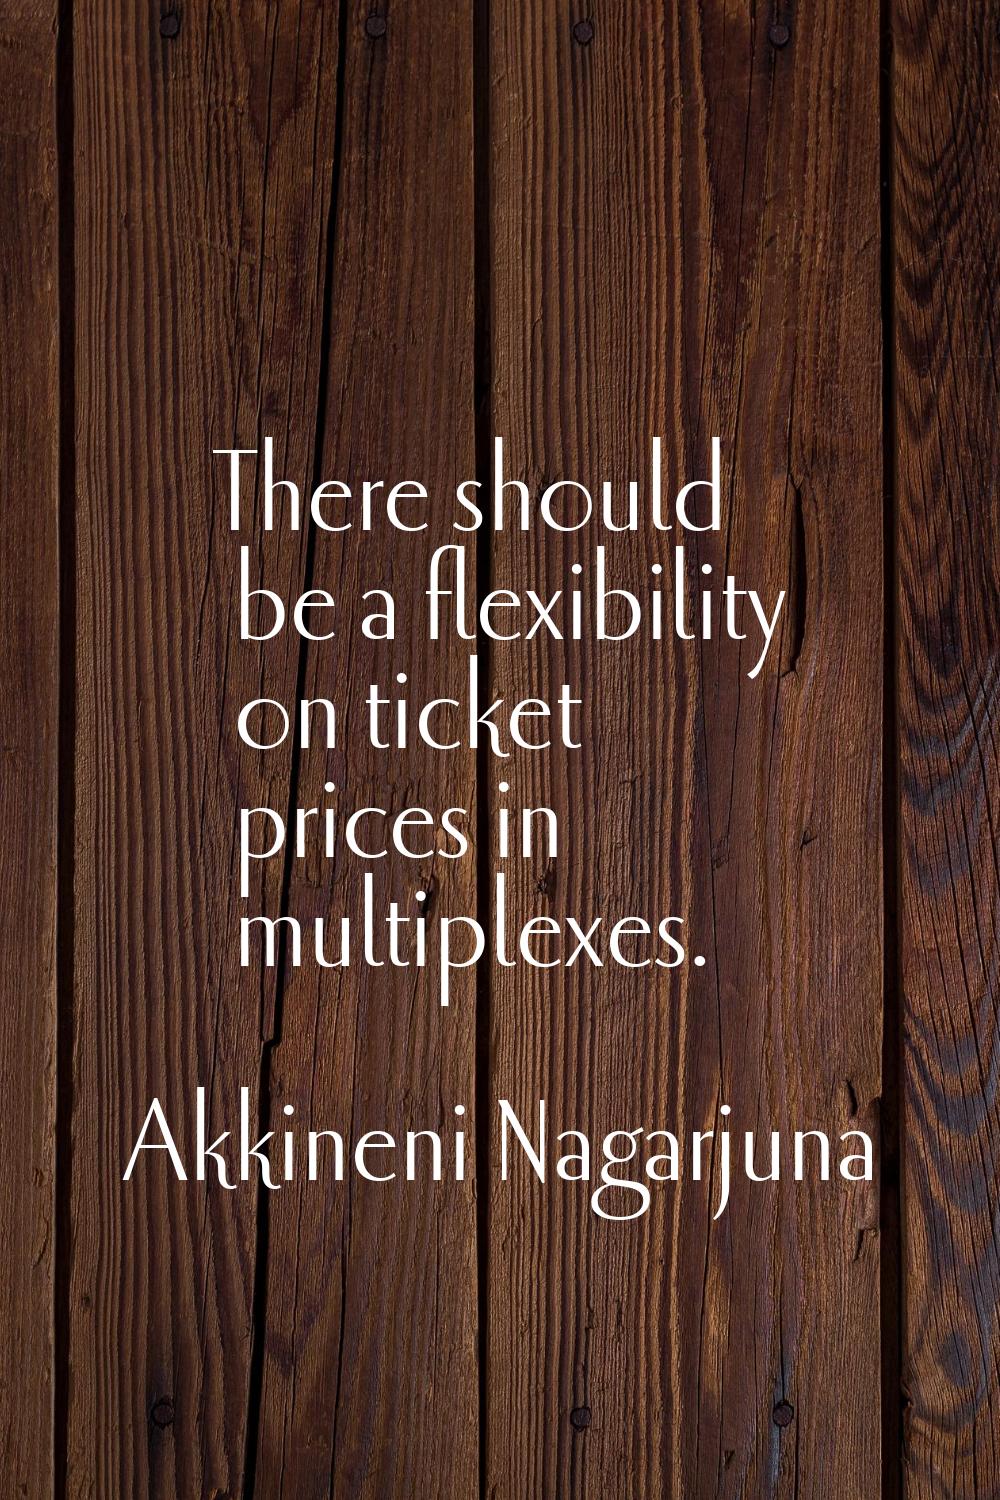 There should be a flexibility on ticket prices in multiplexes.